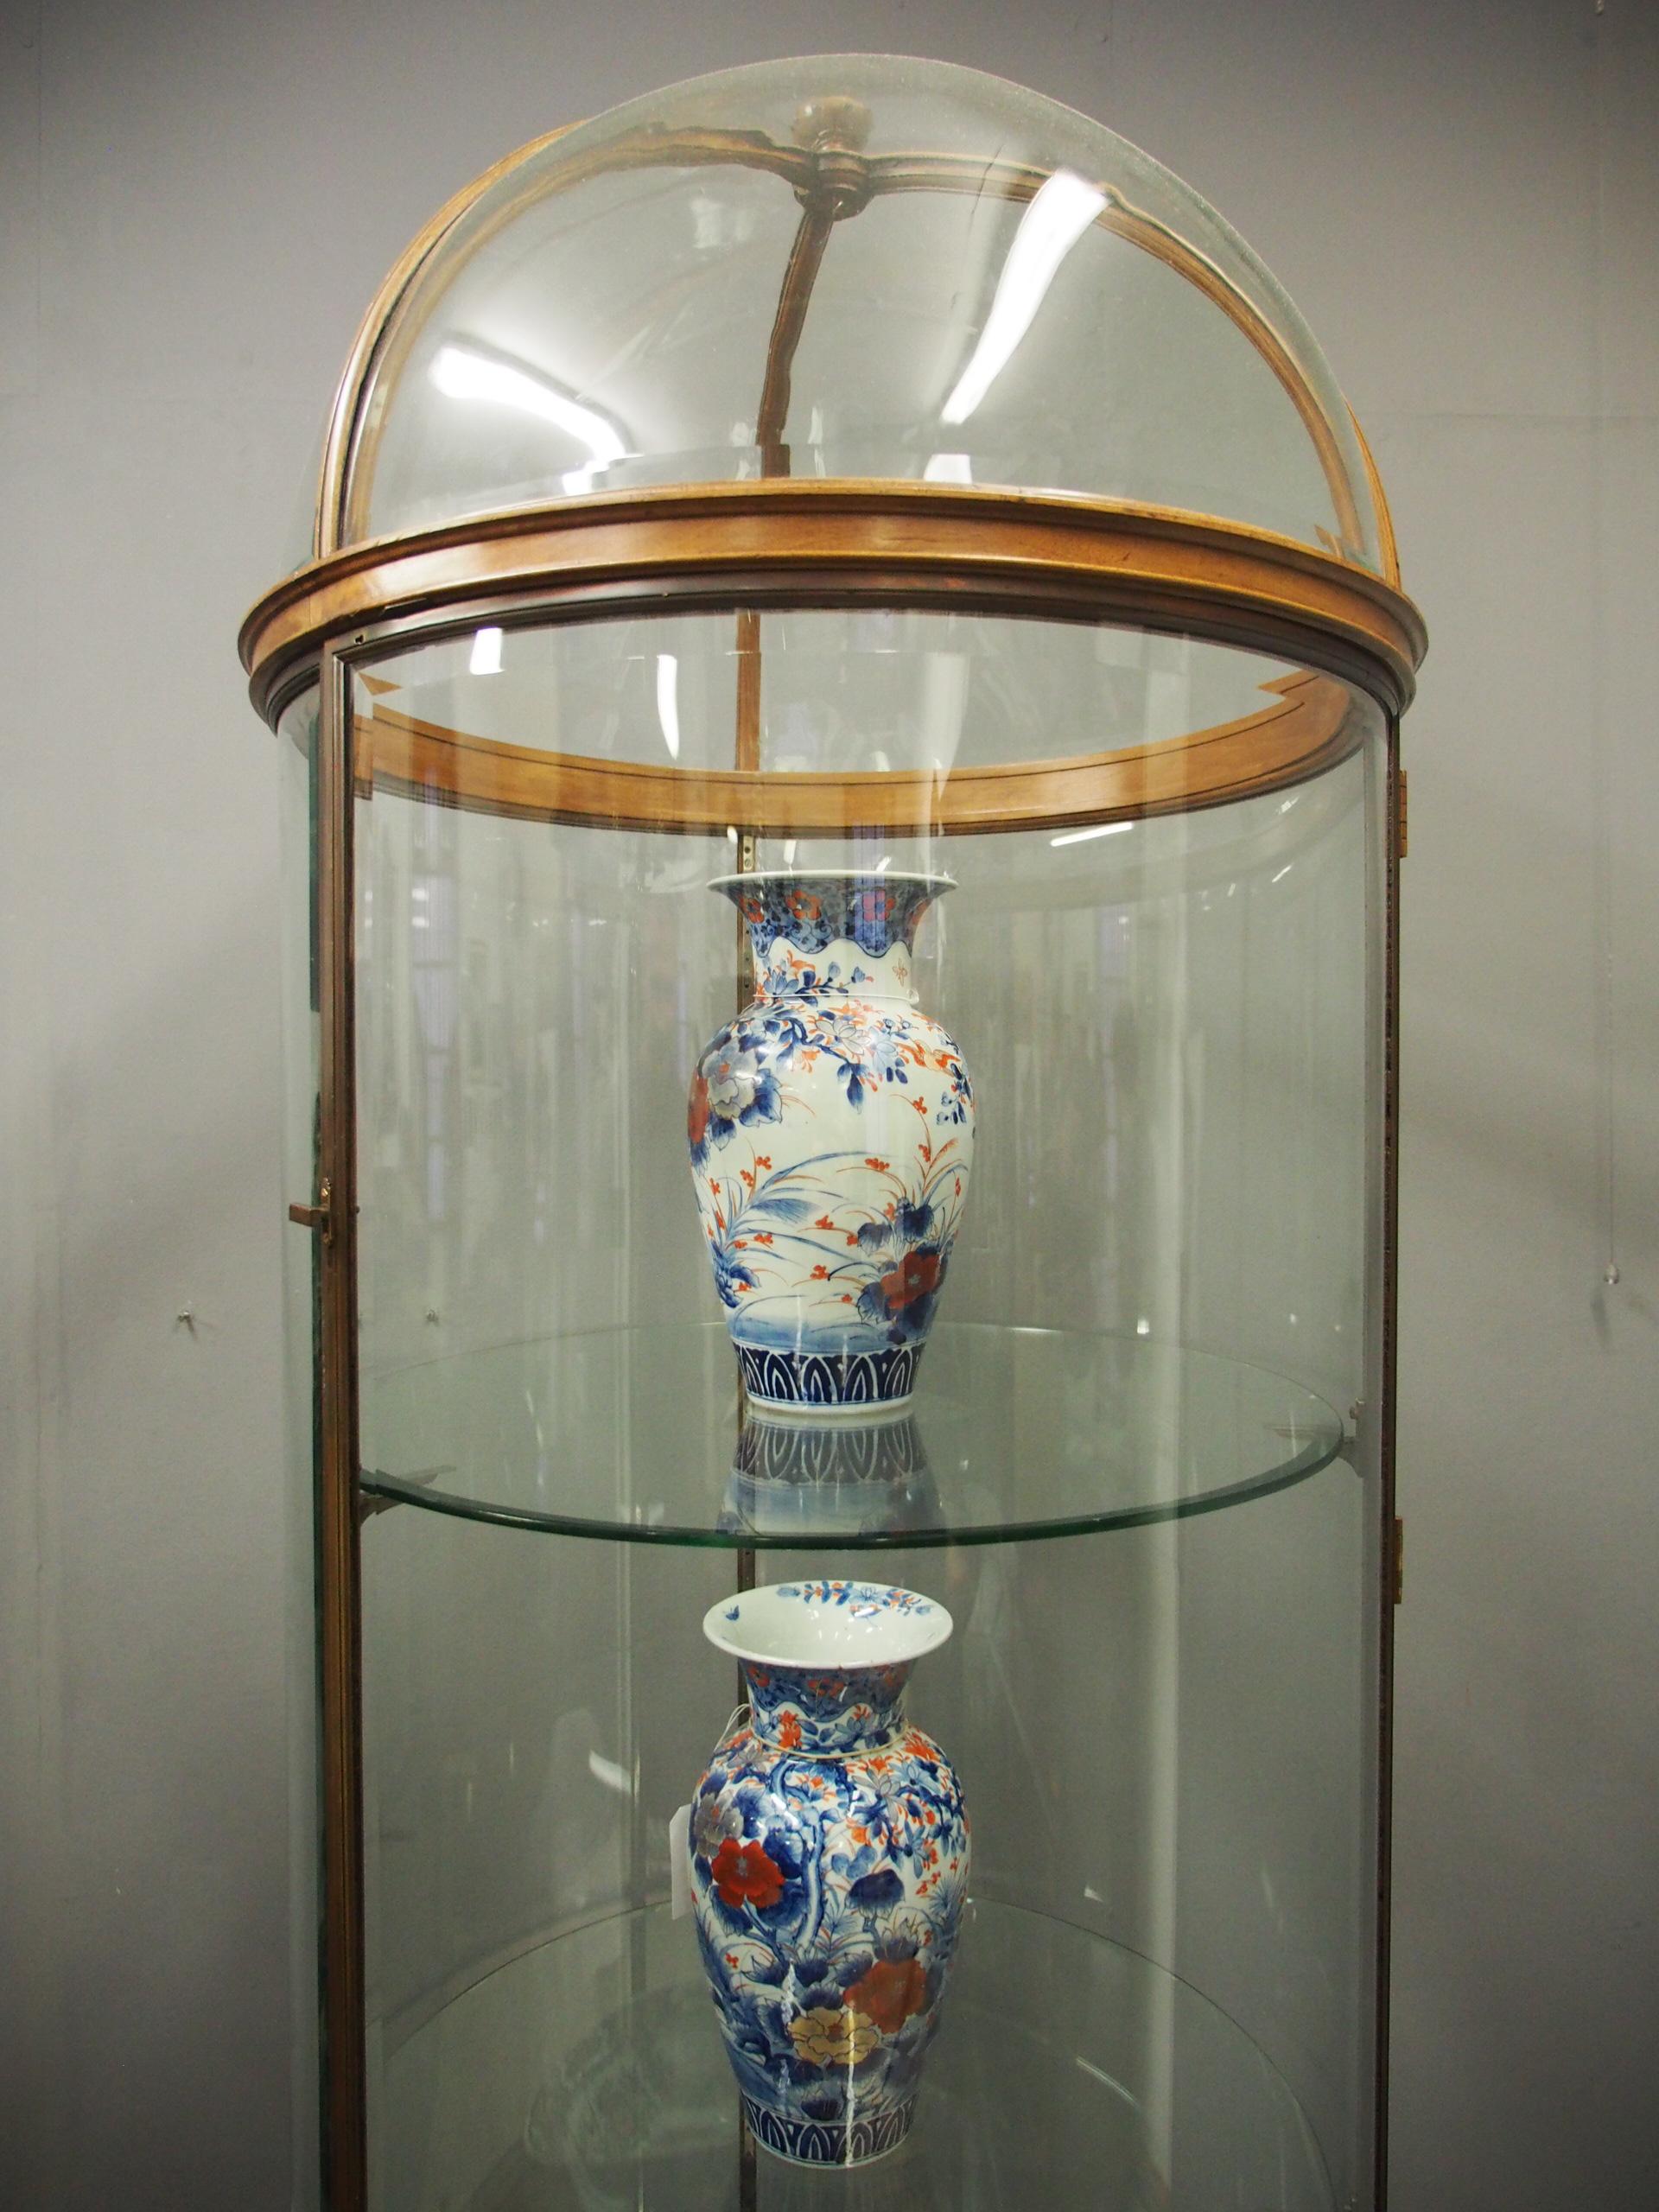 An early 20th century, exhibition quality, walnut and bronze display cabinet. Of circular form with bevel edge glass door and panels, all contained in a bronze frame with a domed, wooden-framed top. Inside are adjustable bevelled edge glass shelves